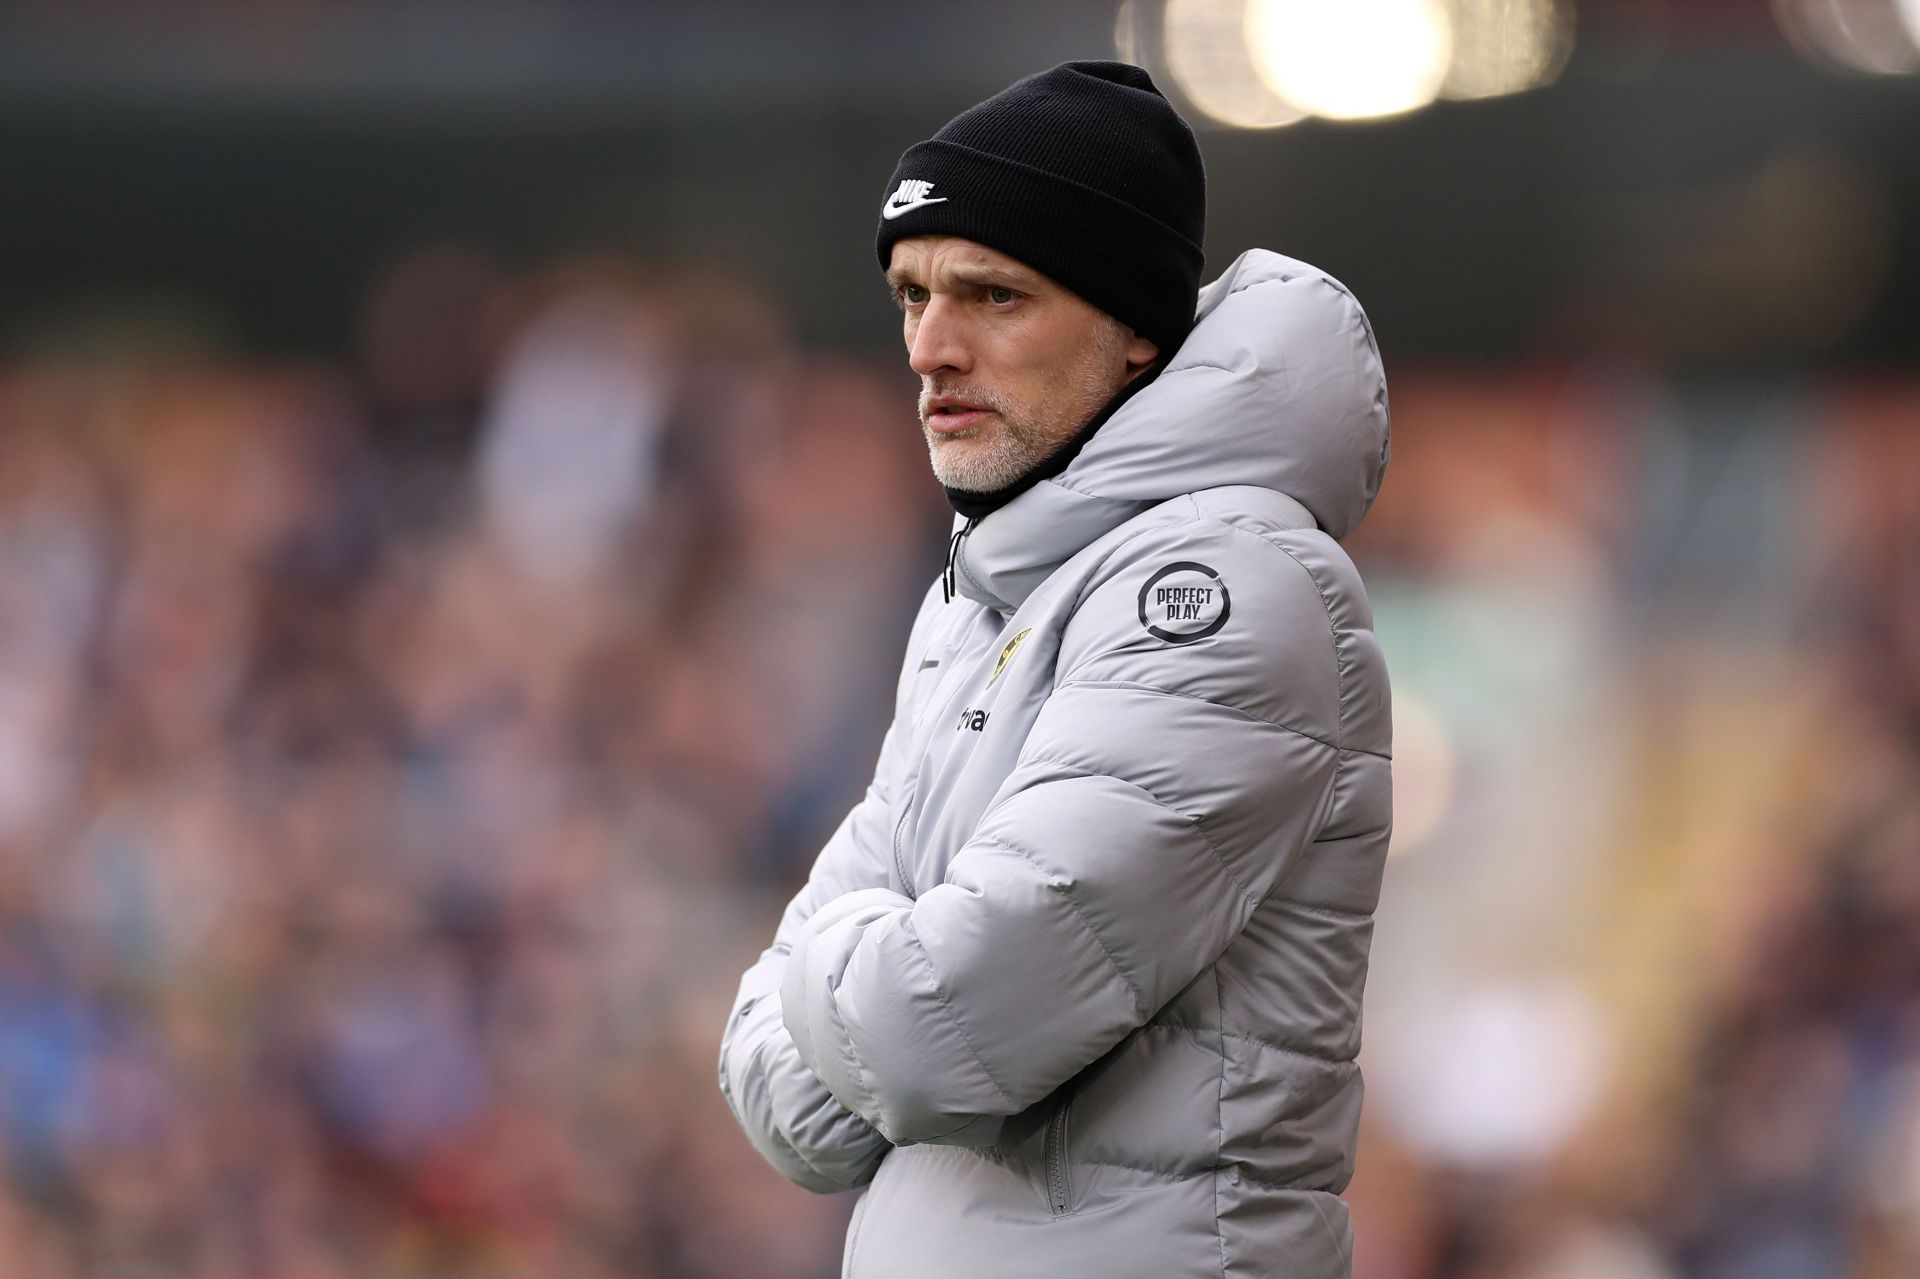 Chelsea manager Thomas Tuchel will target a win against Brentford.